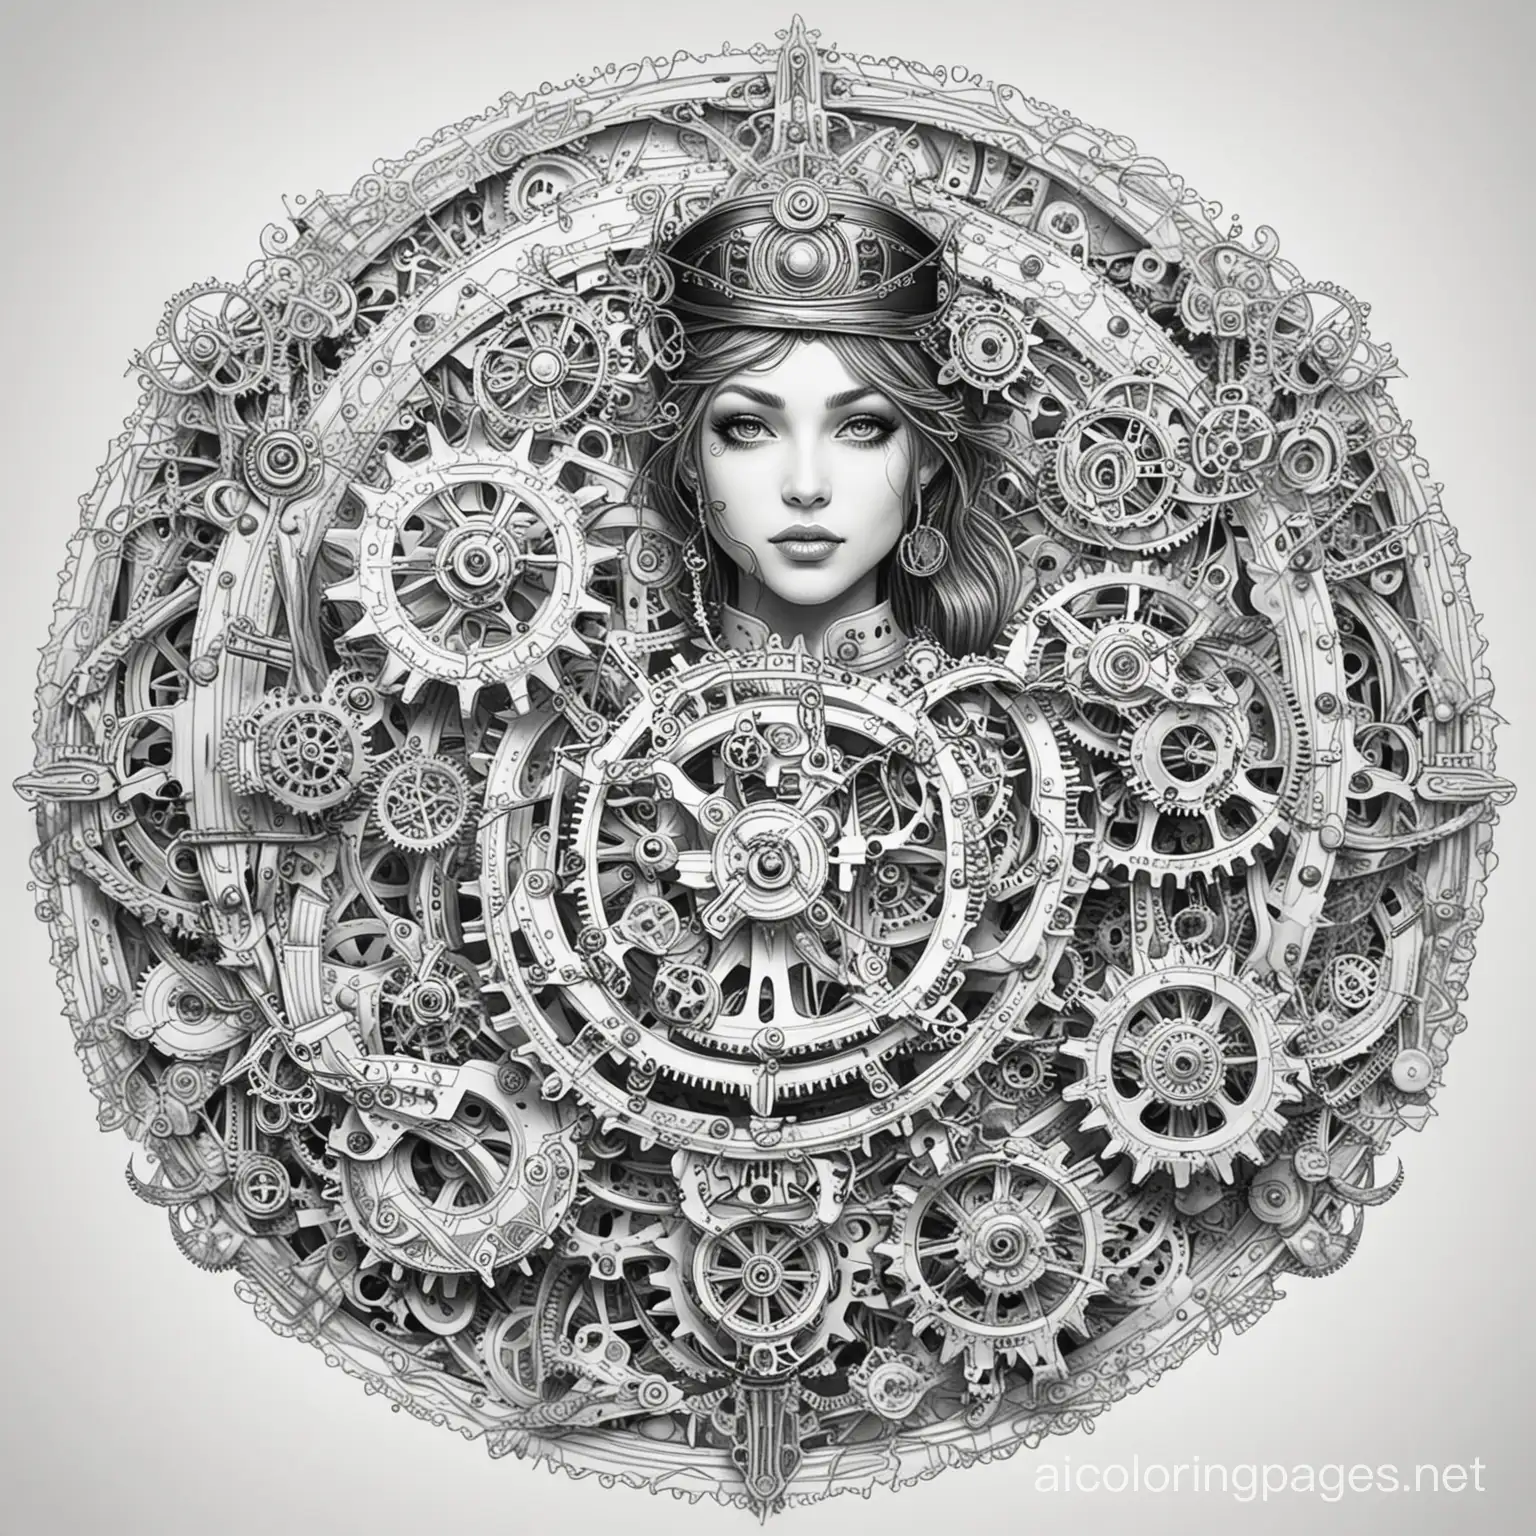 Gothic-Steampunk-Coloring-Page-Victorian-Fashion-and-Mechanical-Gears